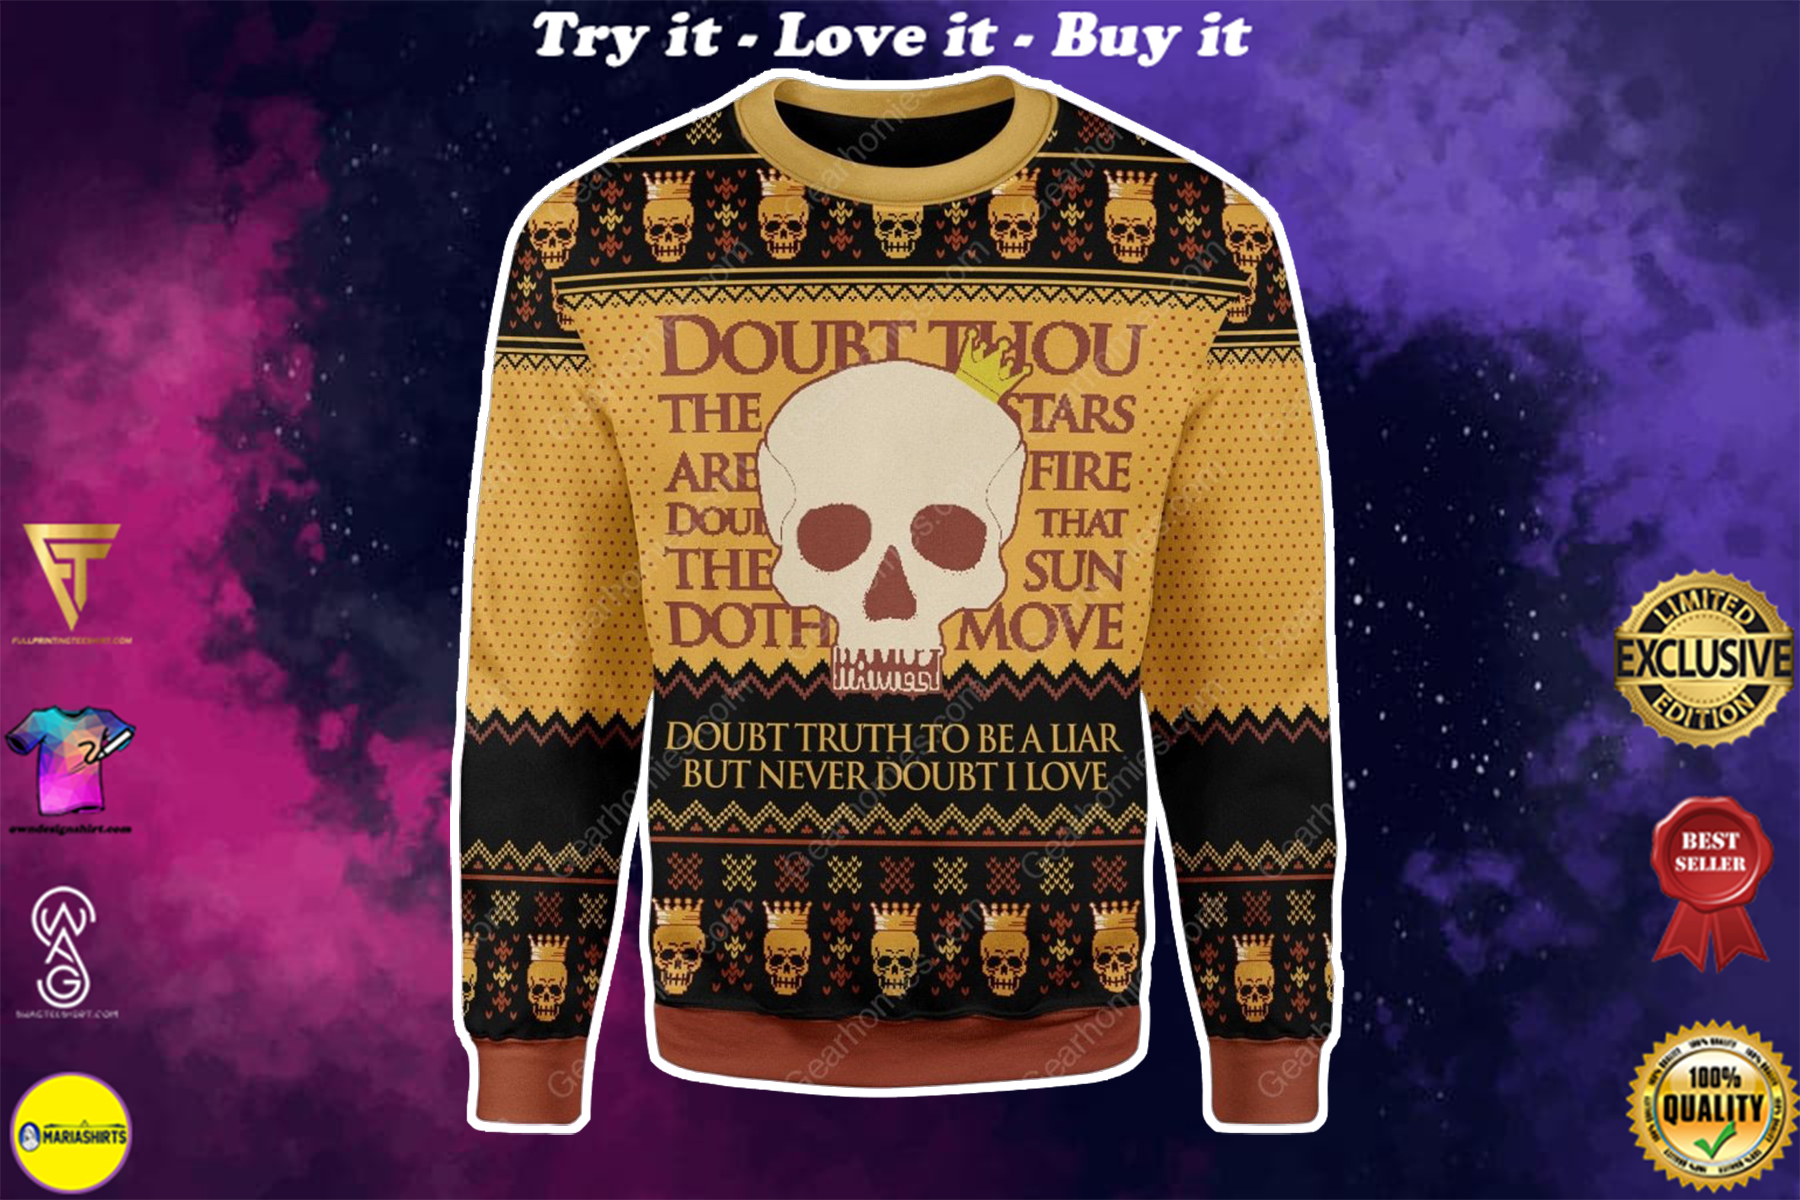 hamlet william shakespeare doubt truth to be a liar ugly christmas sweater